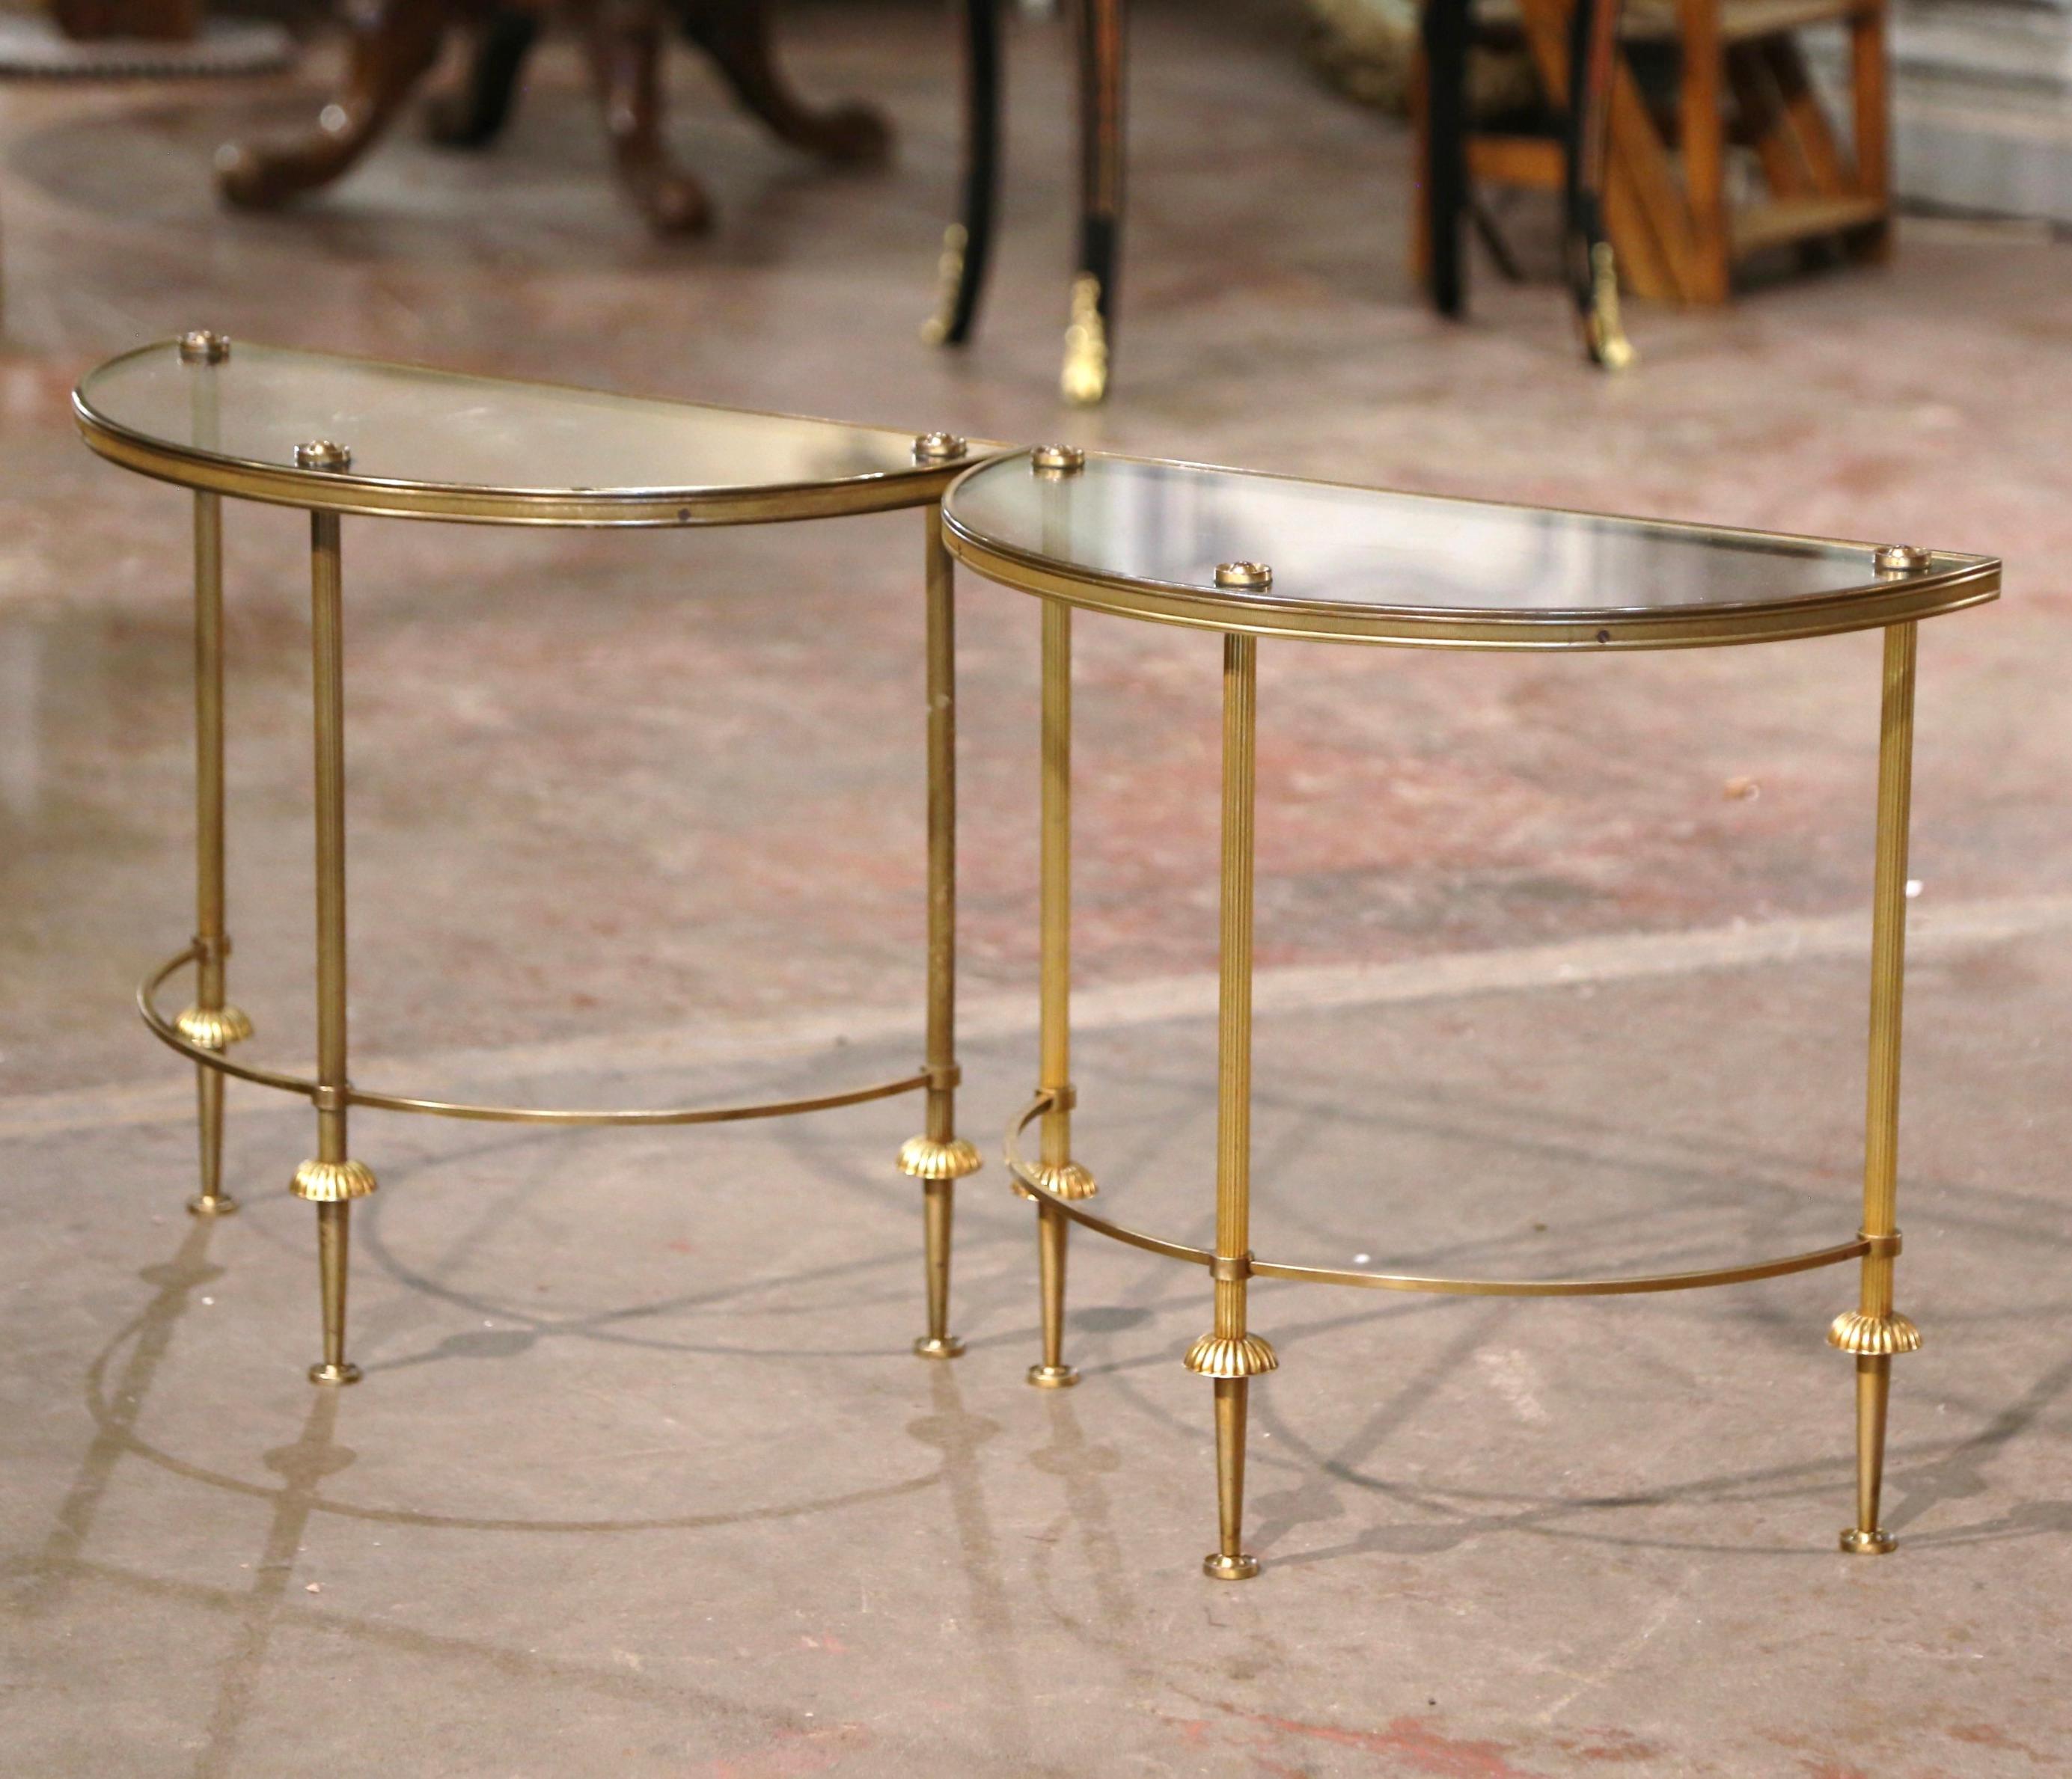 These vintage side tables attributed to Maison Baguès, were created in Paris circa 1950. Built of brass and shaped as half moon, each petite table stands on three fluted legs ending with tapered feet, over a bottom curved stretcher. Each surface is